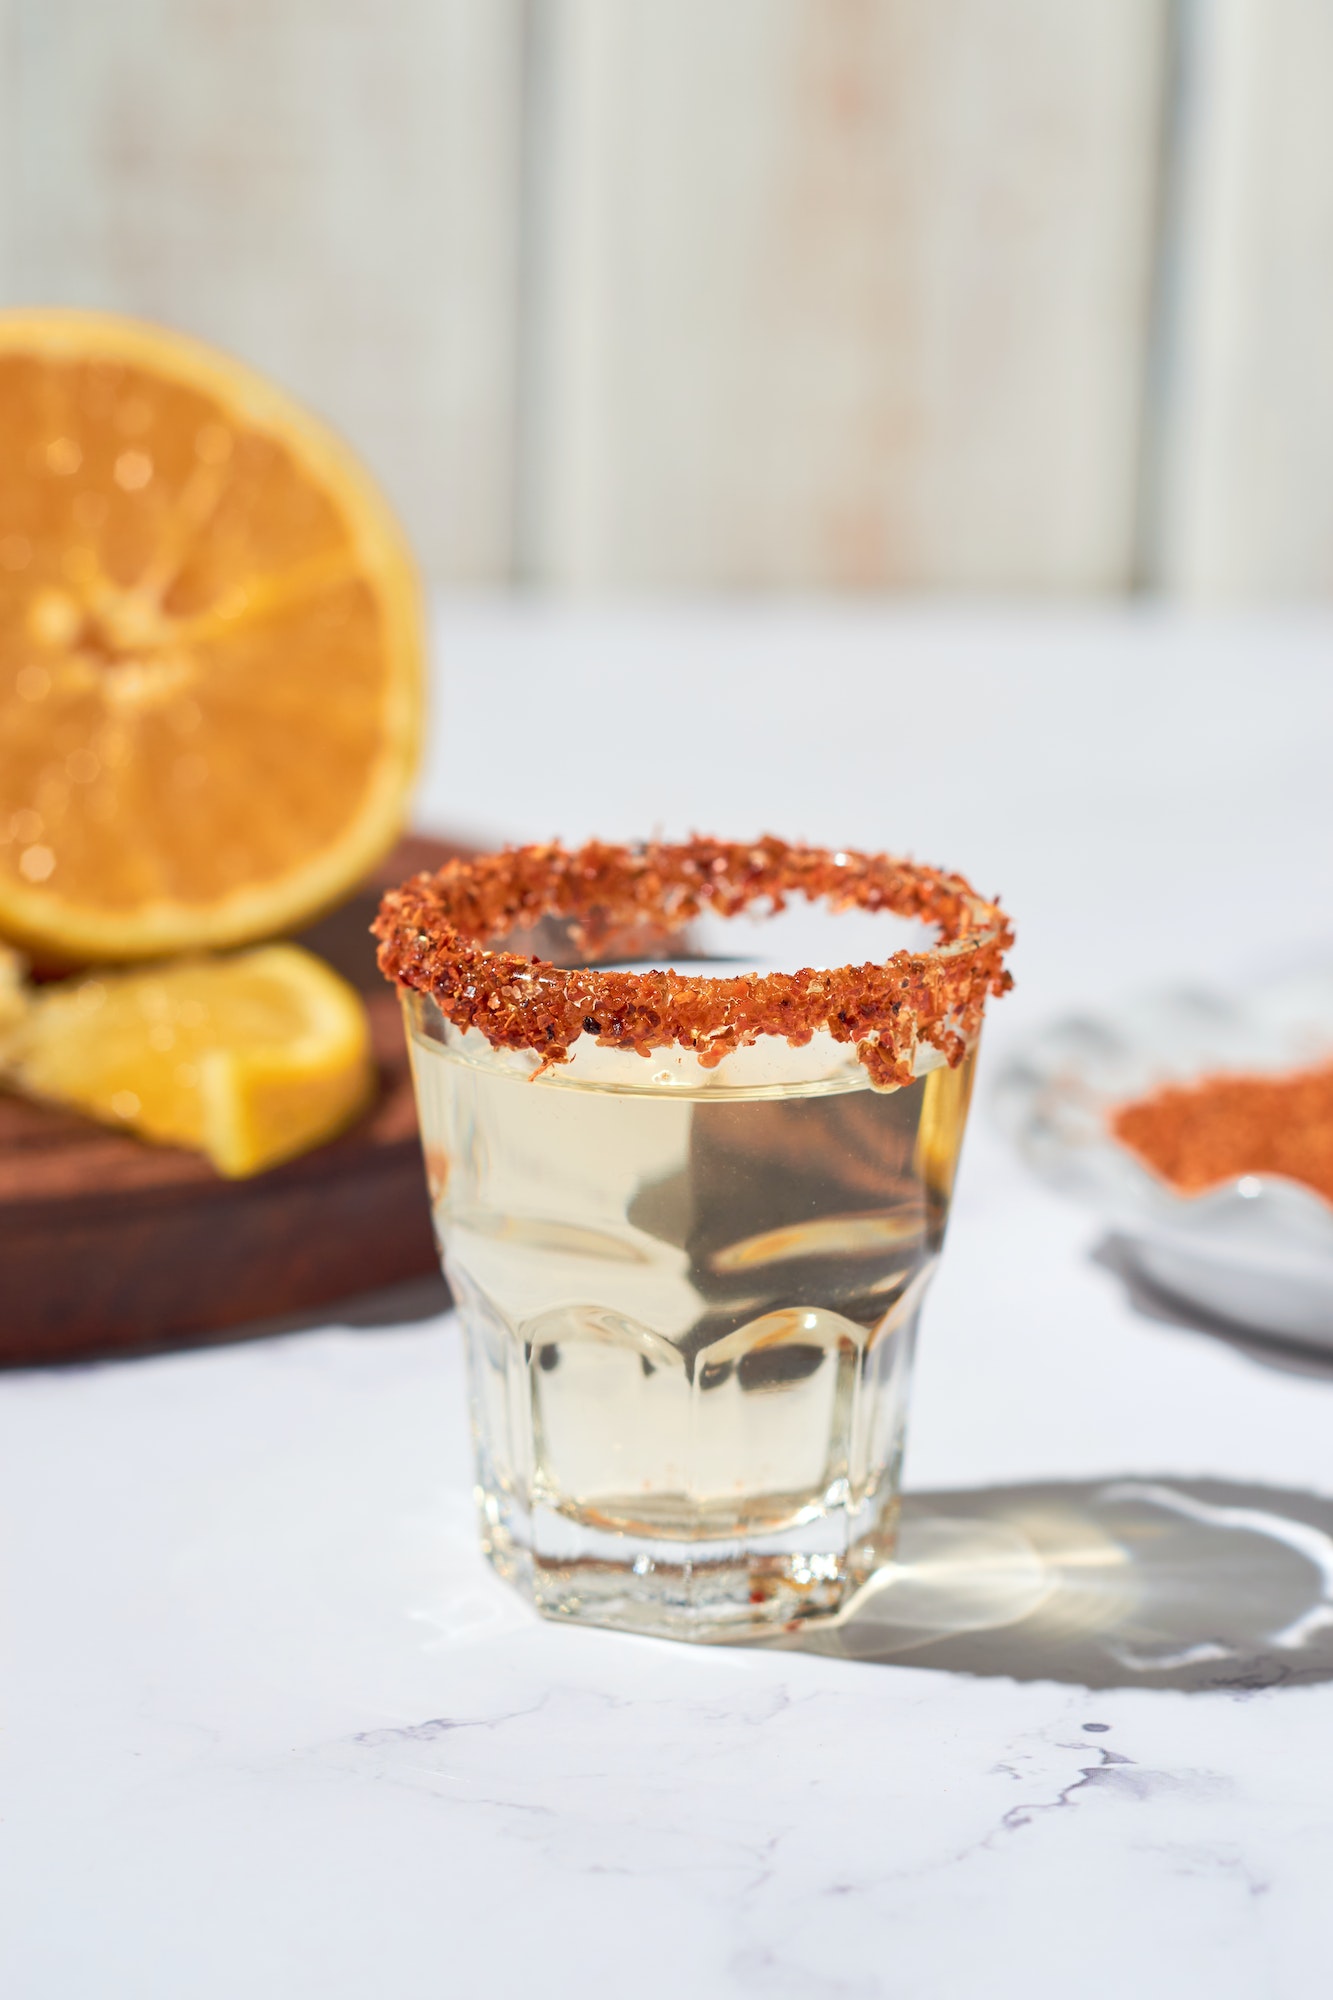 Mexican mezcal shots with slice of orange fruit and chili